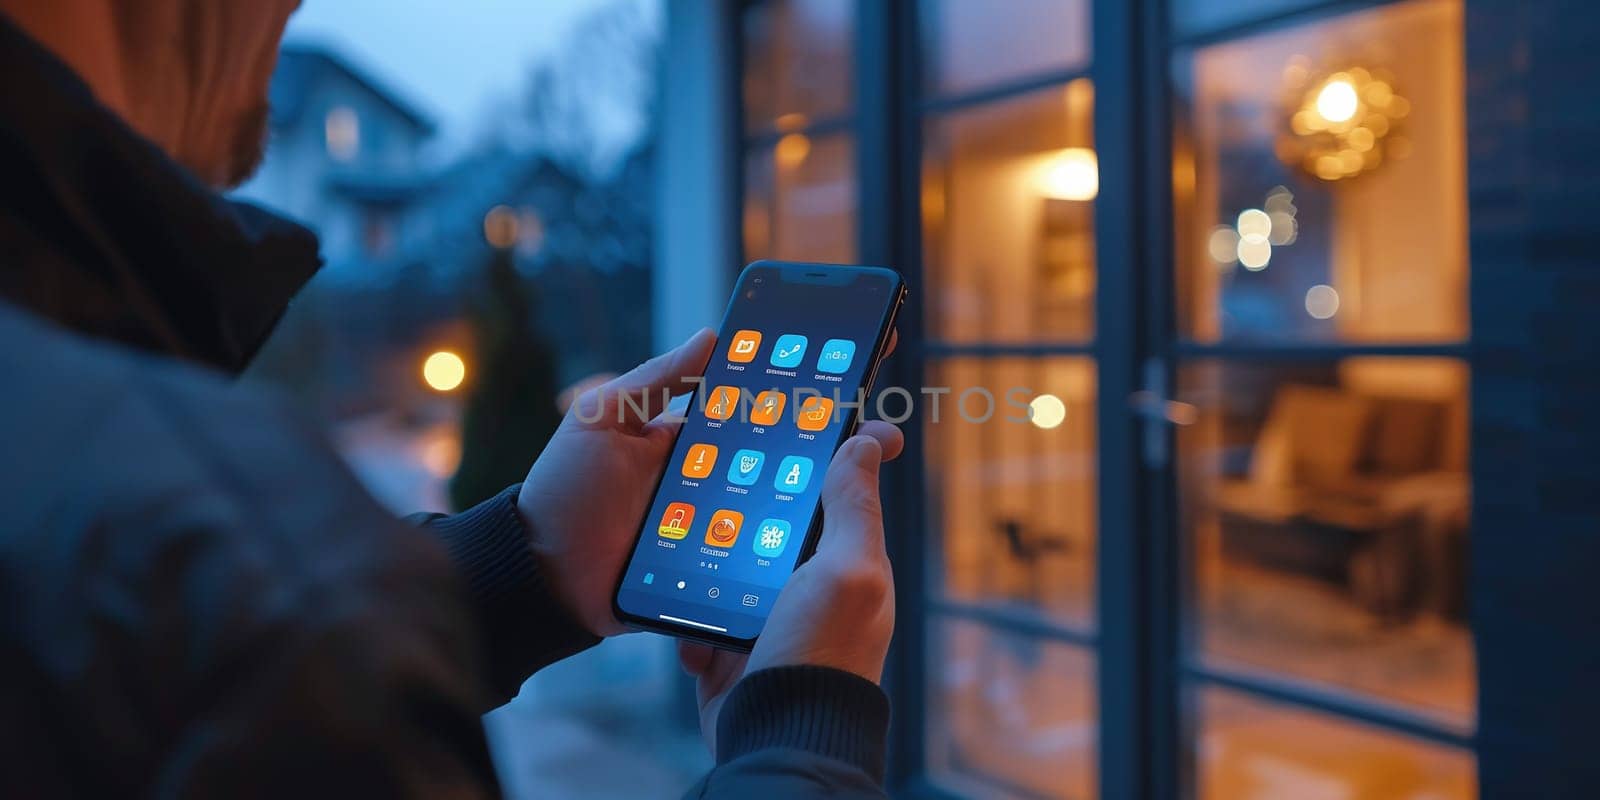 smart house, home automation, device with app icons. Man uses his smartphone with smarthome security app to unlock the door of his house. by Andelov13